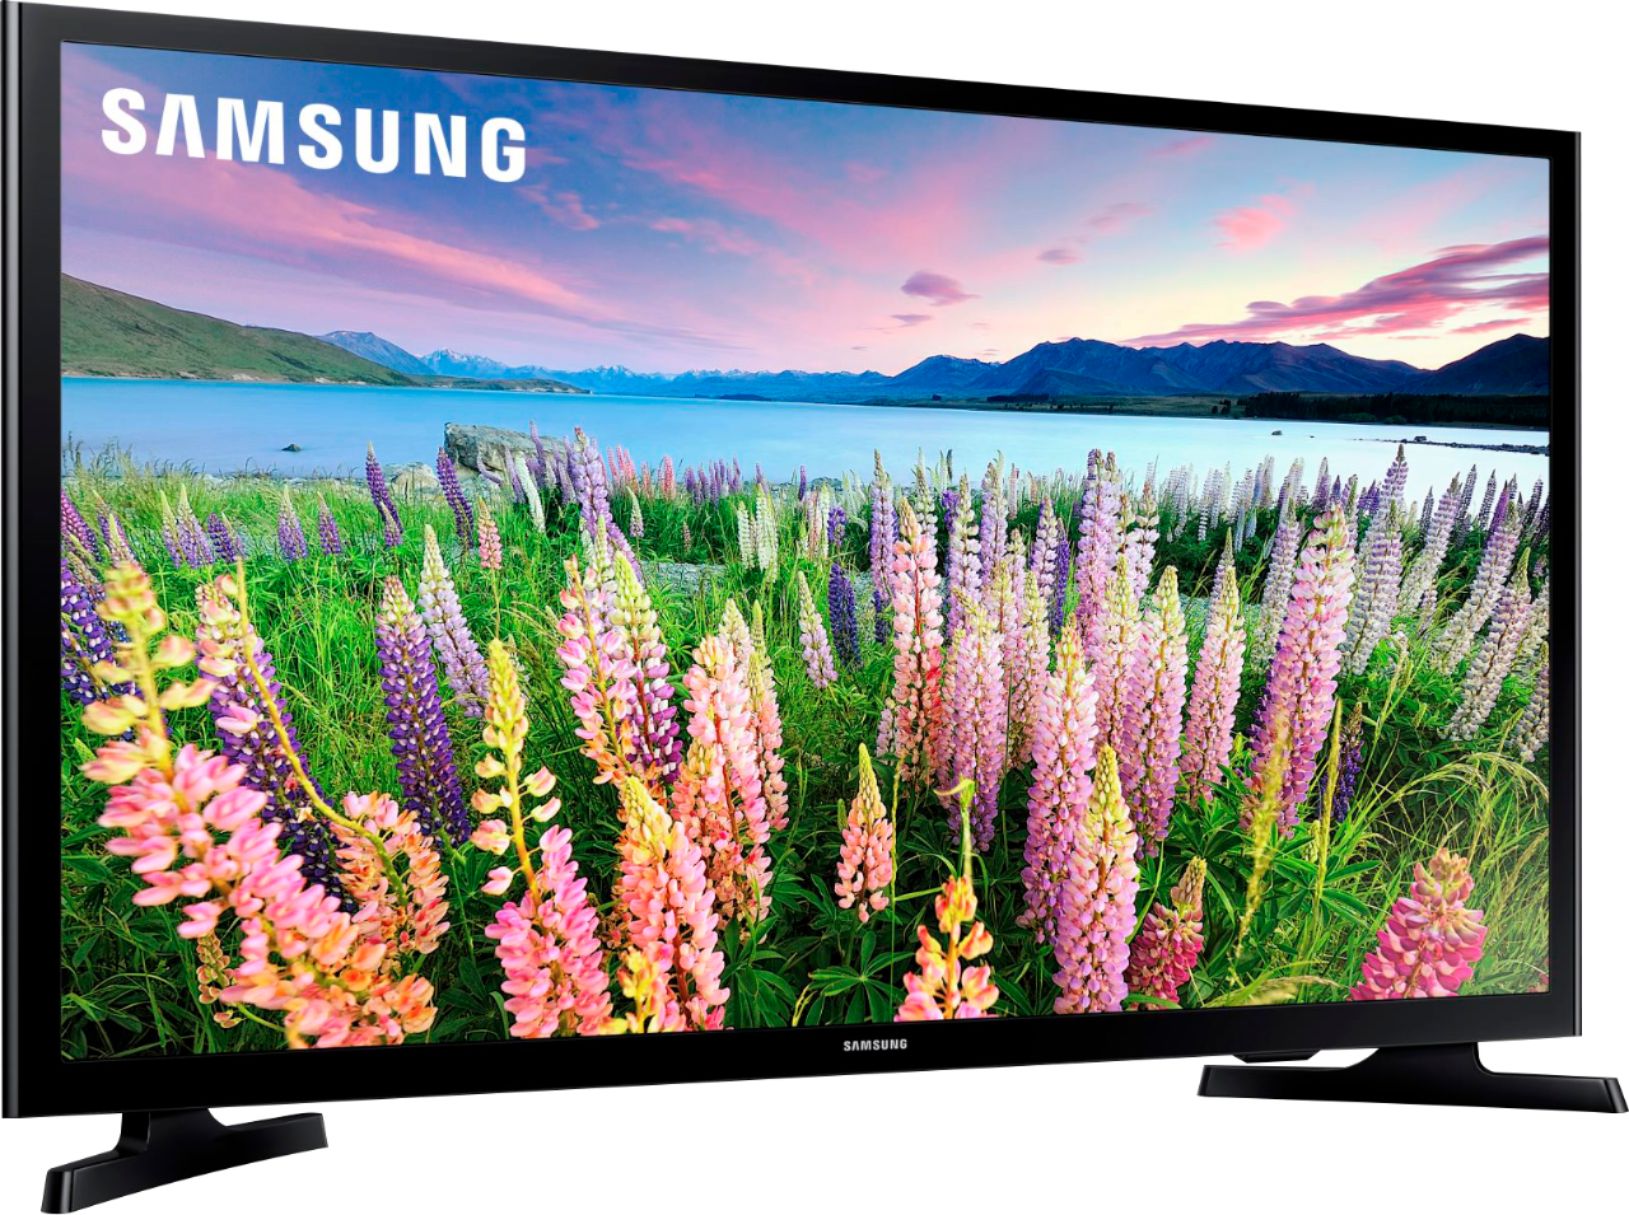 Angle View: Samsung - 40" Class 5 Series LED Full HD Smart Tizen TV